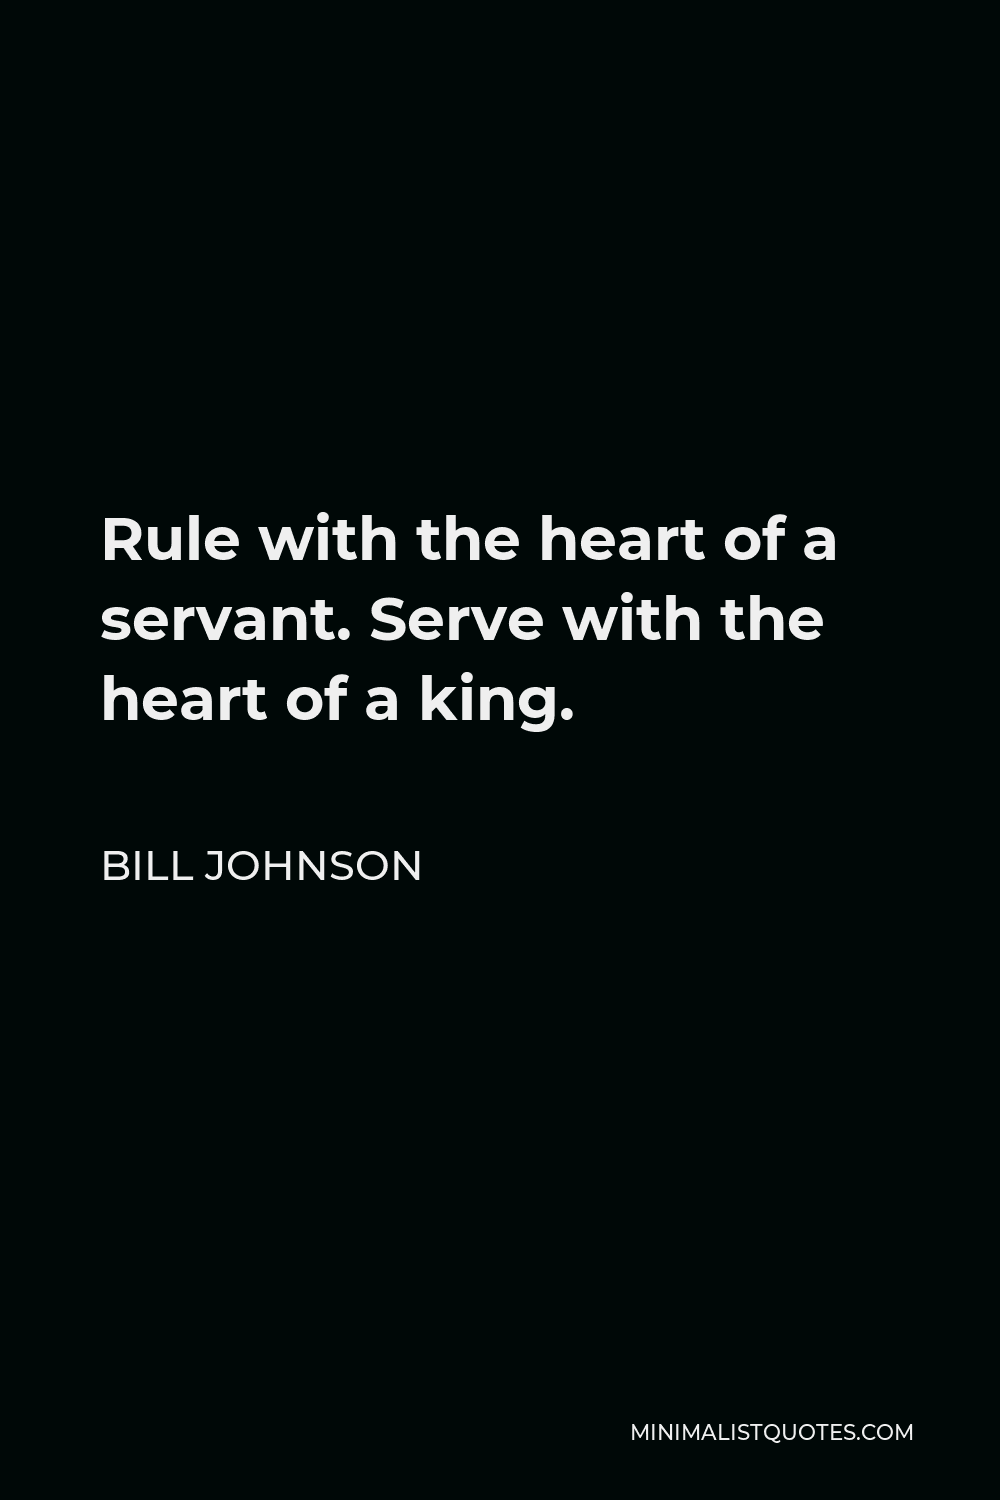 Bill Johnson Quote - Rule with the heart of a servant. Serve with the heart of a king.